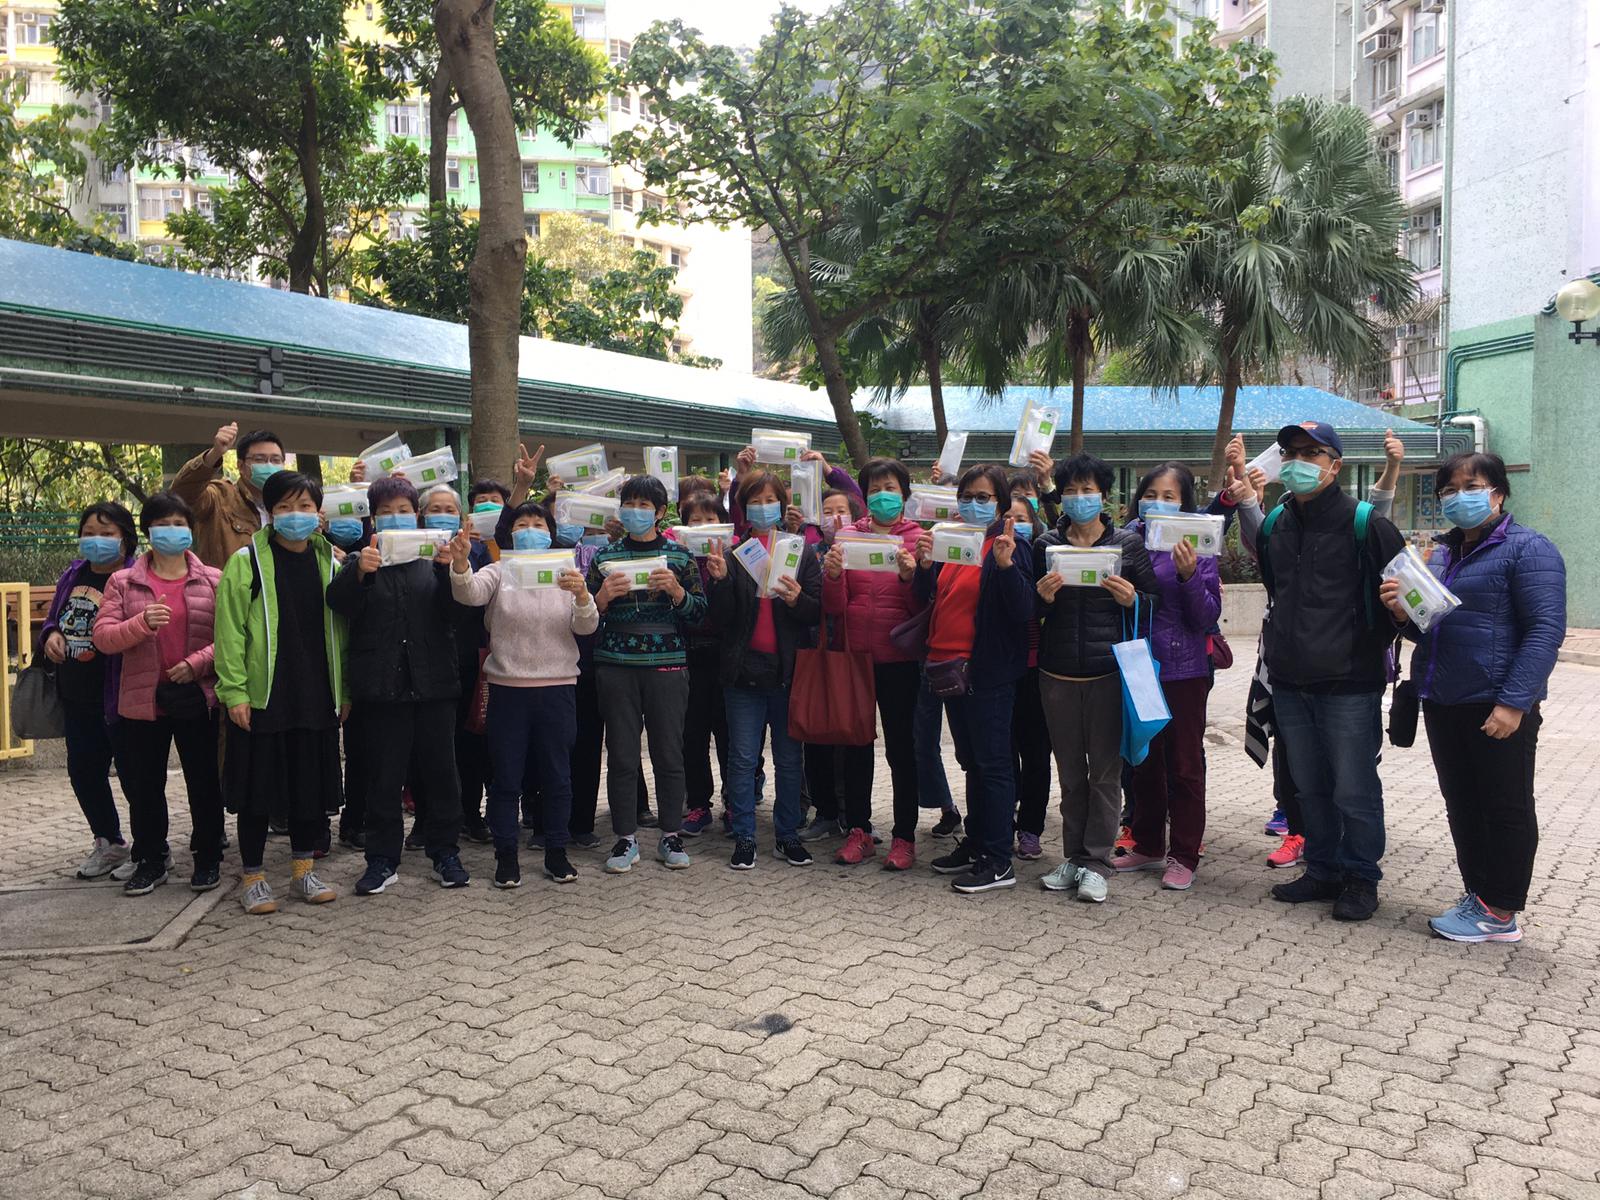 Cleaners at Yiu Tung Estate, Shau Kei Wan, holding the masks they received.